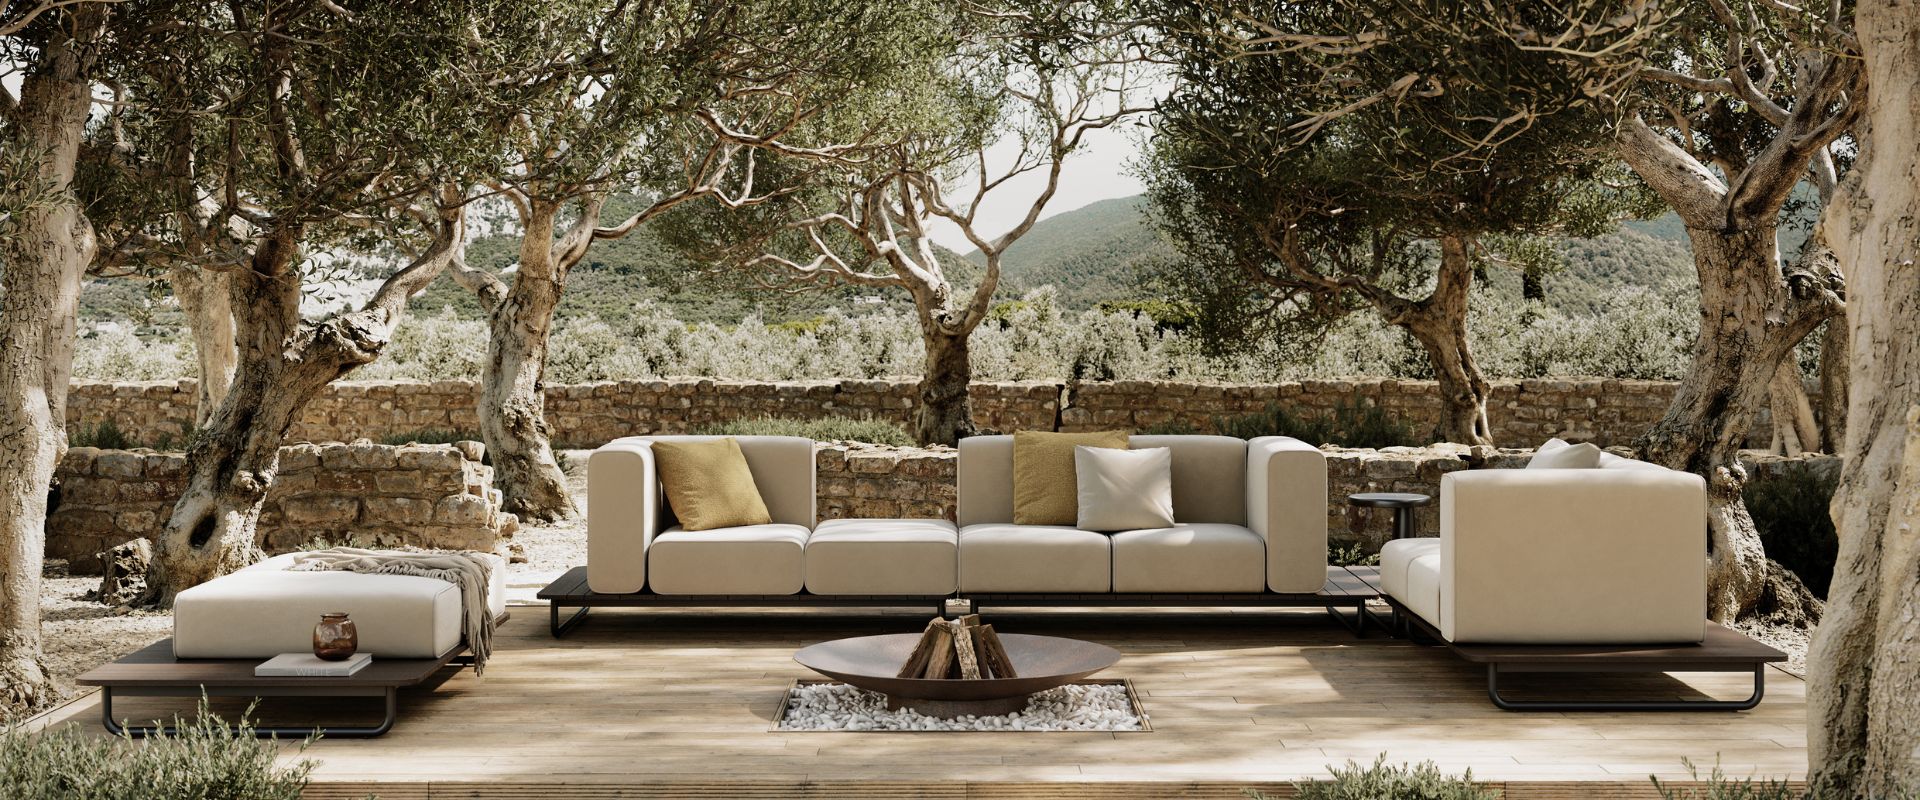 Domkapa Outdoor Collections